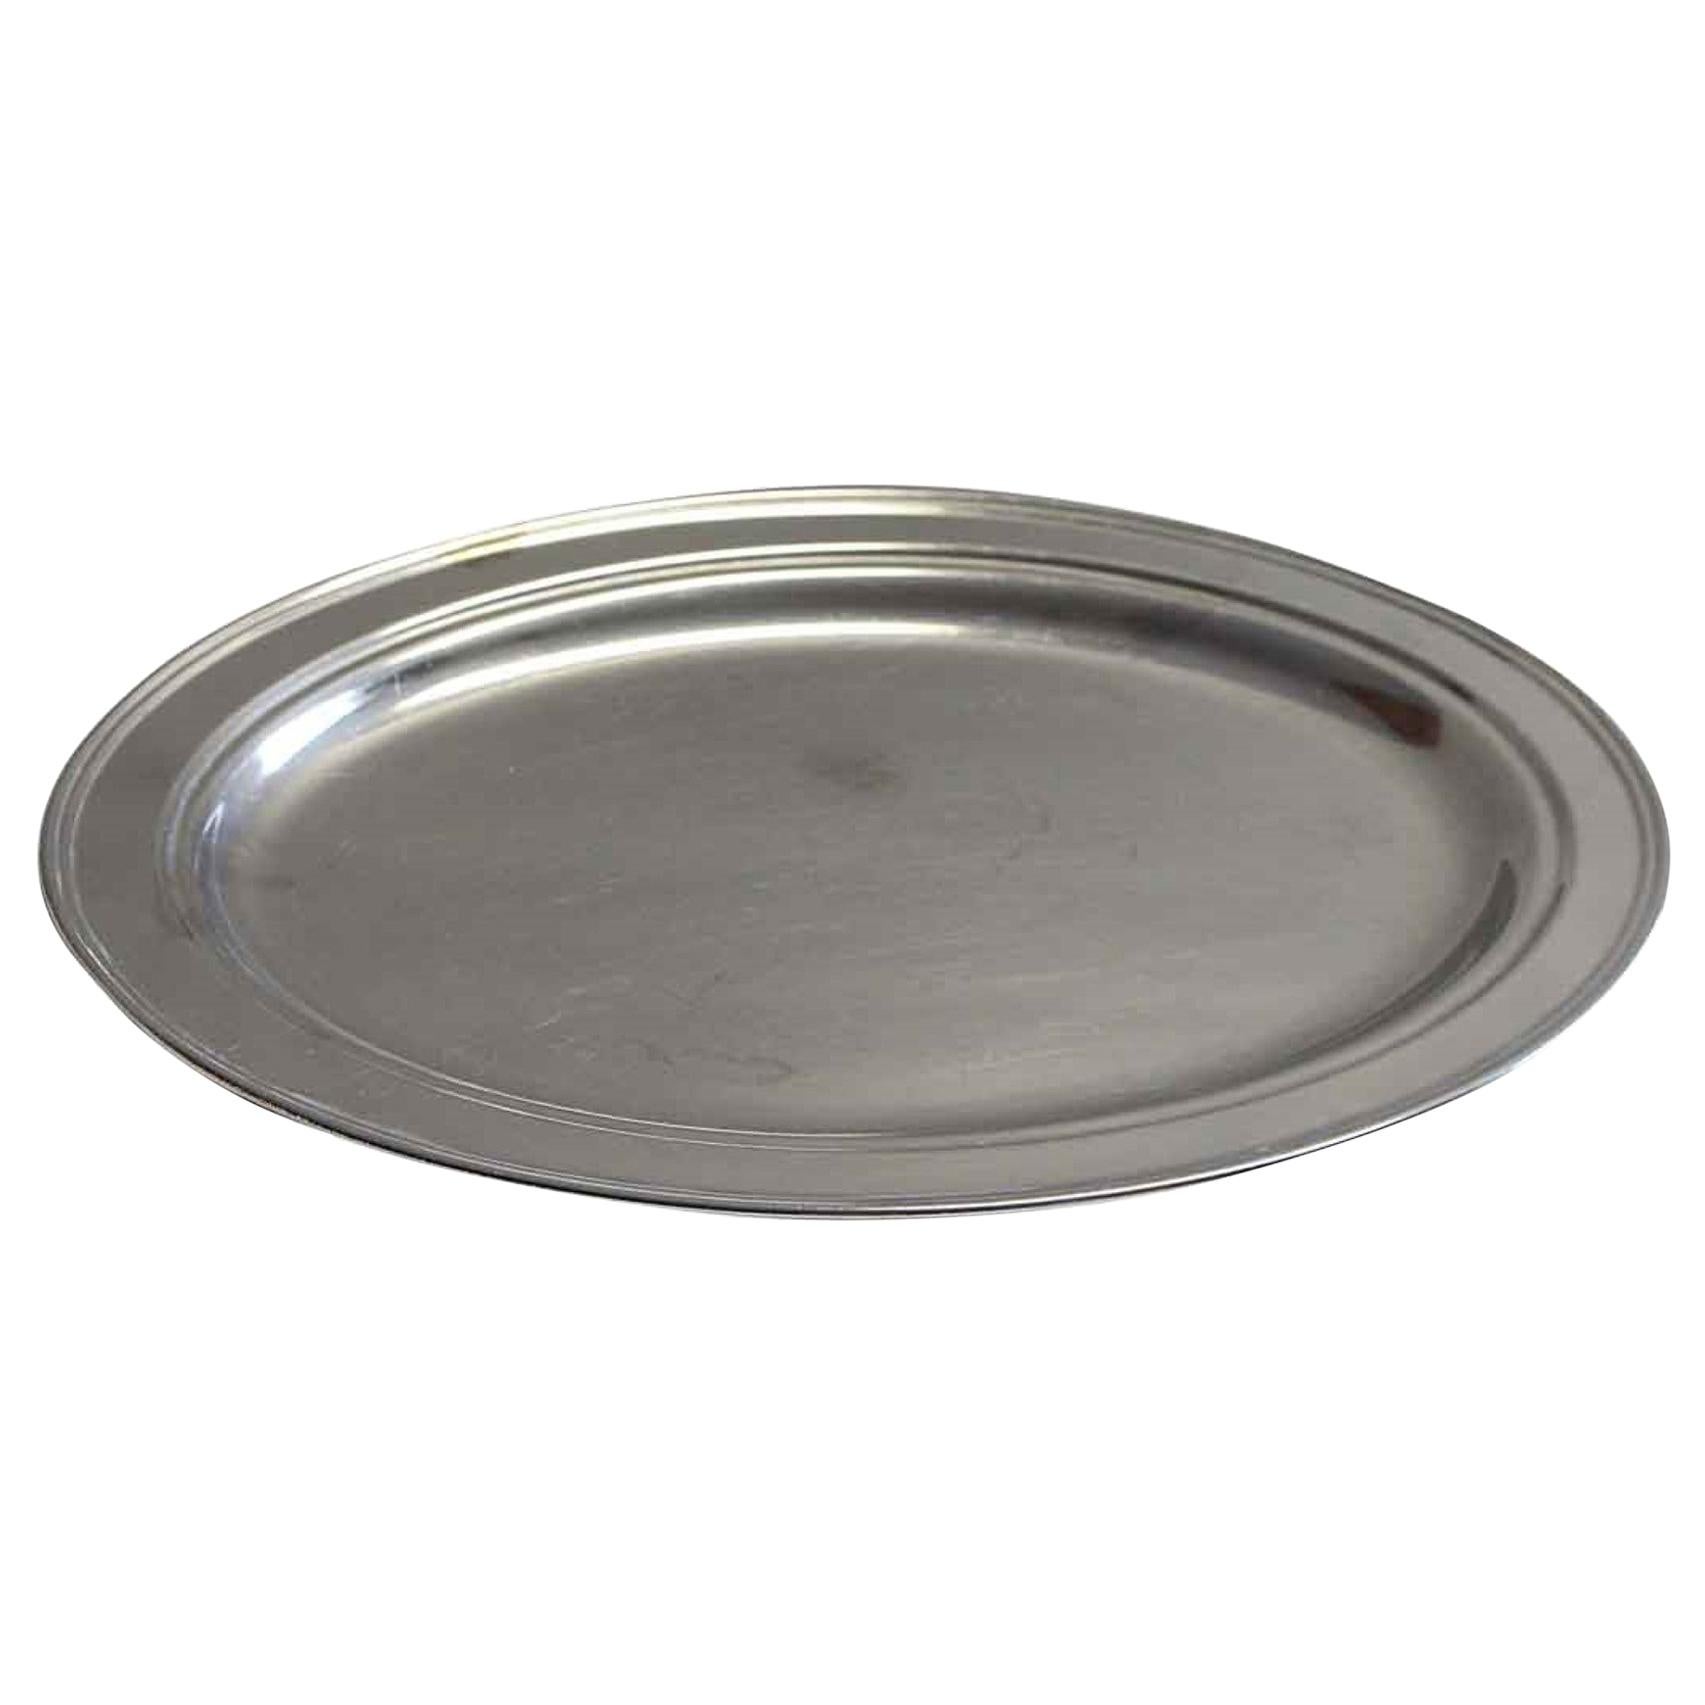 1990s NYC Waldorf Astoria Hotel Oval Stainless Steel Tray